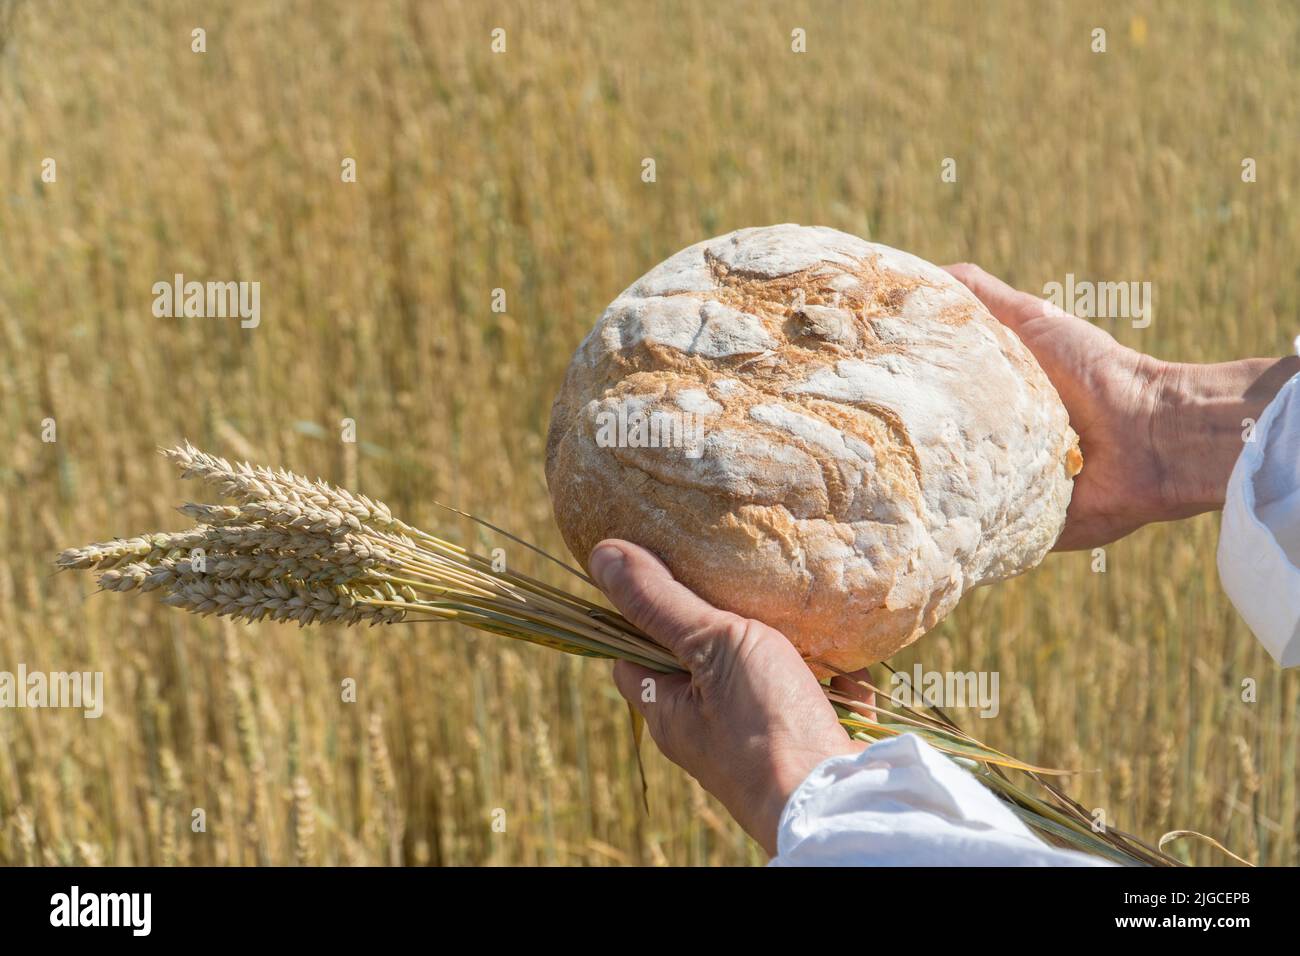 Male hands holding home baked bread loaf and ears of wheat above ripe wheat field. World food security concept. Stock Photo